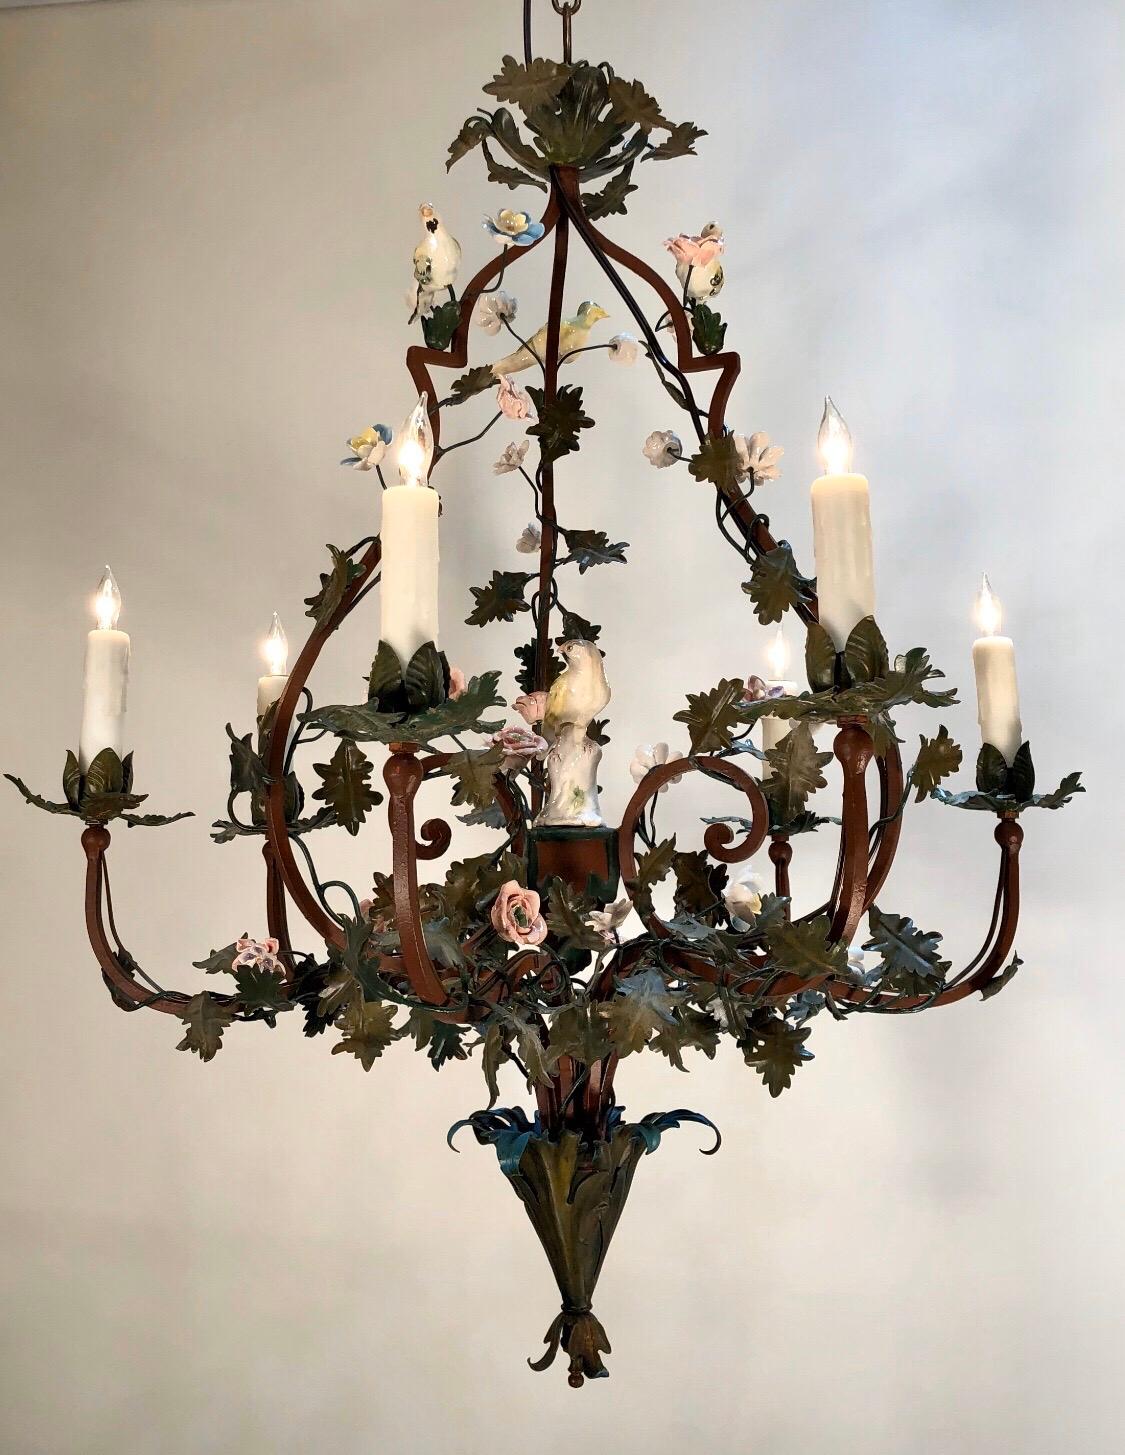 Elegant pair of Tôle cage form Louis XIV six arm chandeliers in the chinoiserie style. Each chandelier has a hand painted iron cage wrapped in vines with Tôle leaves and hand painted porcelain flowers in three styles. The center of the chandeliers